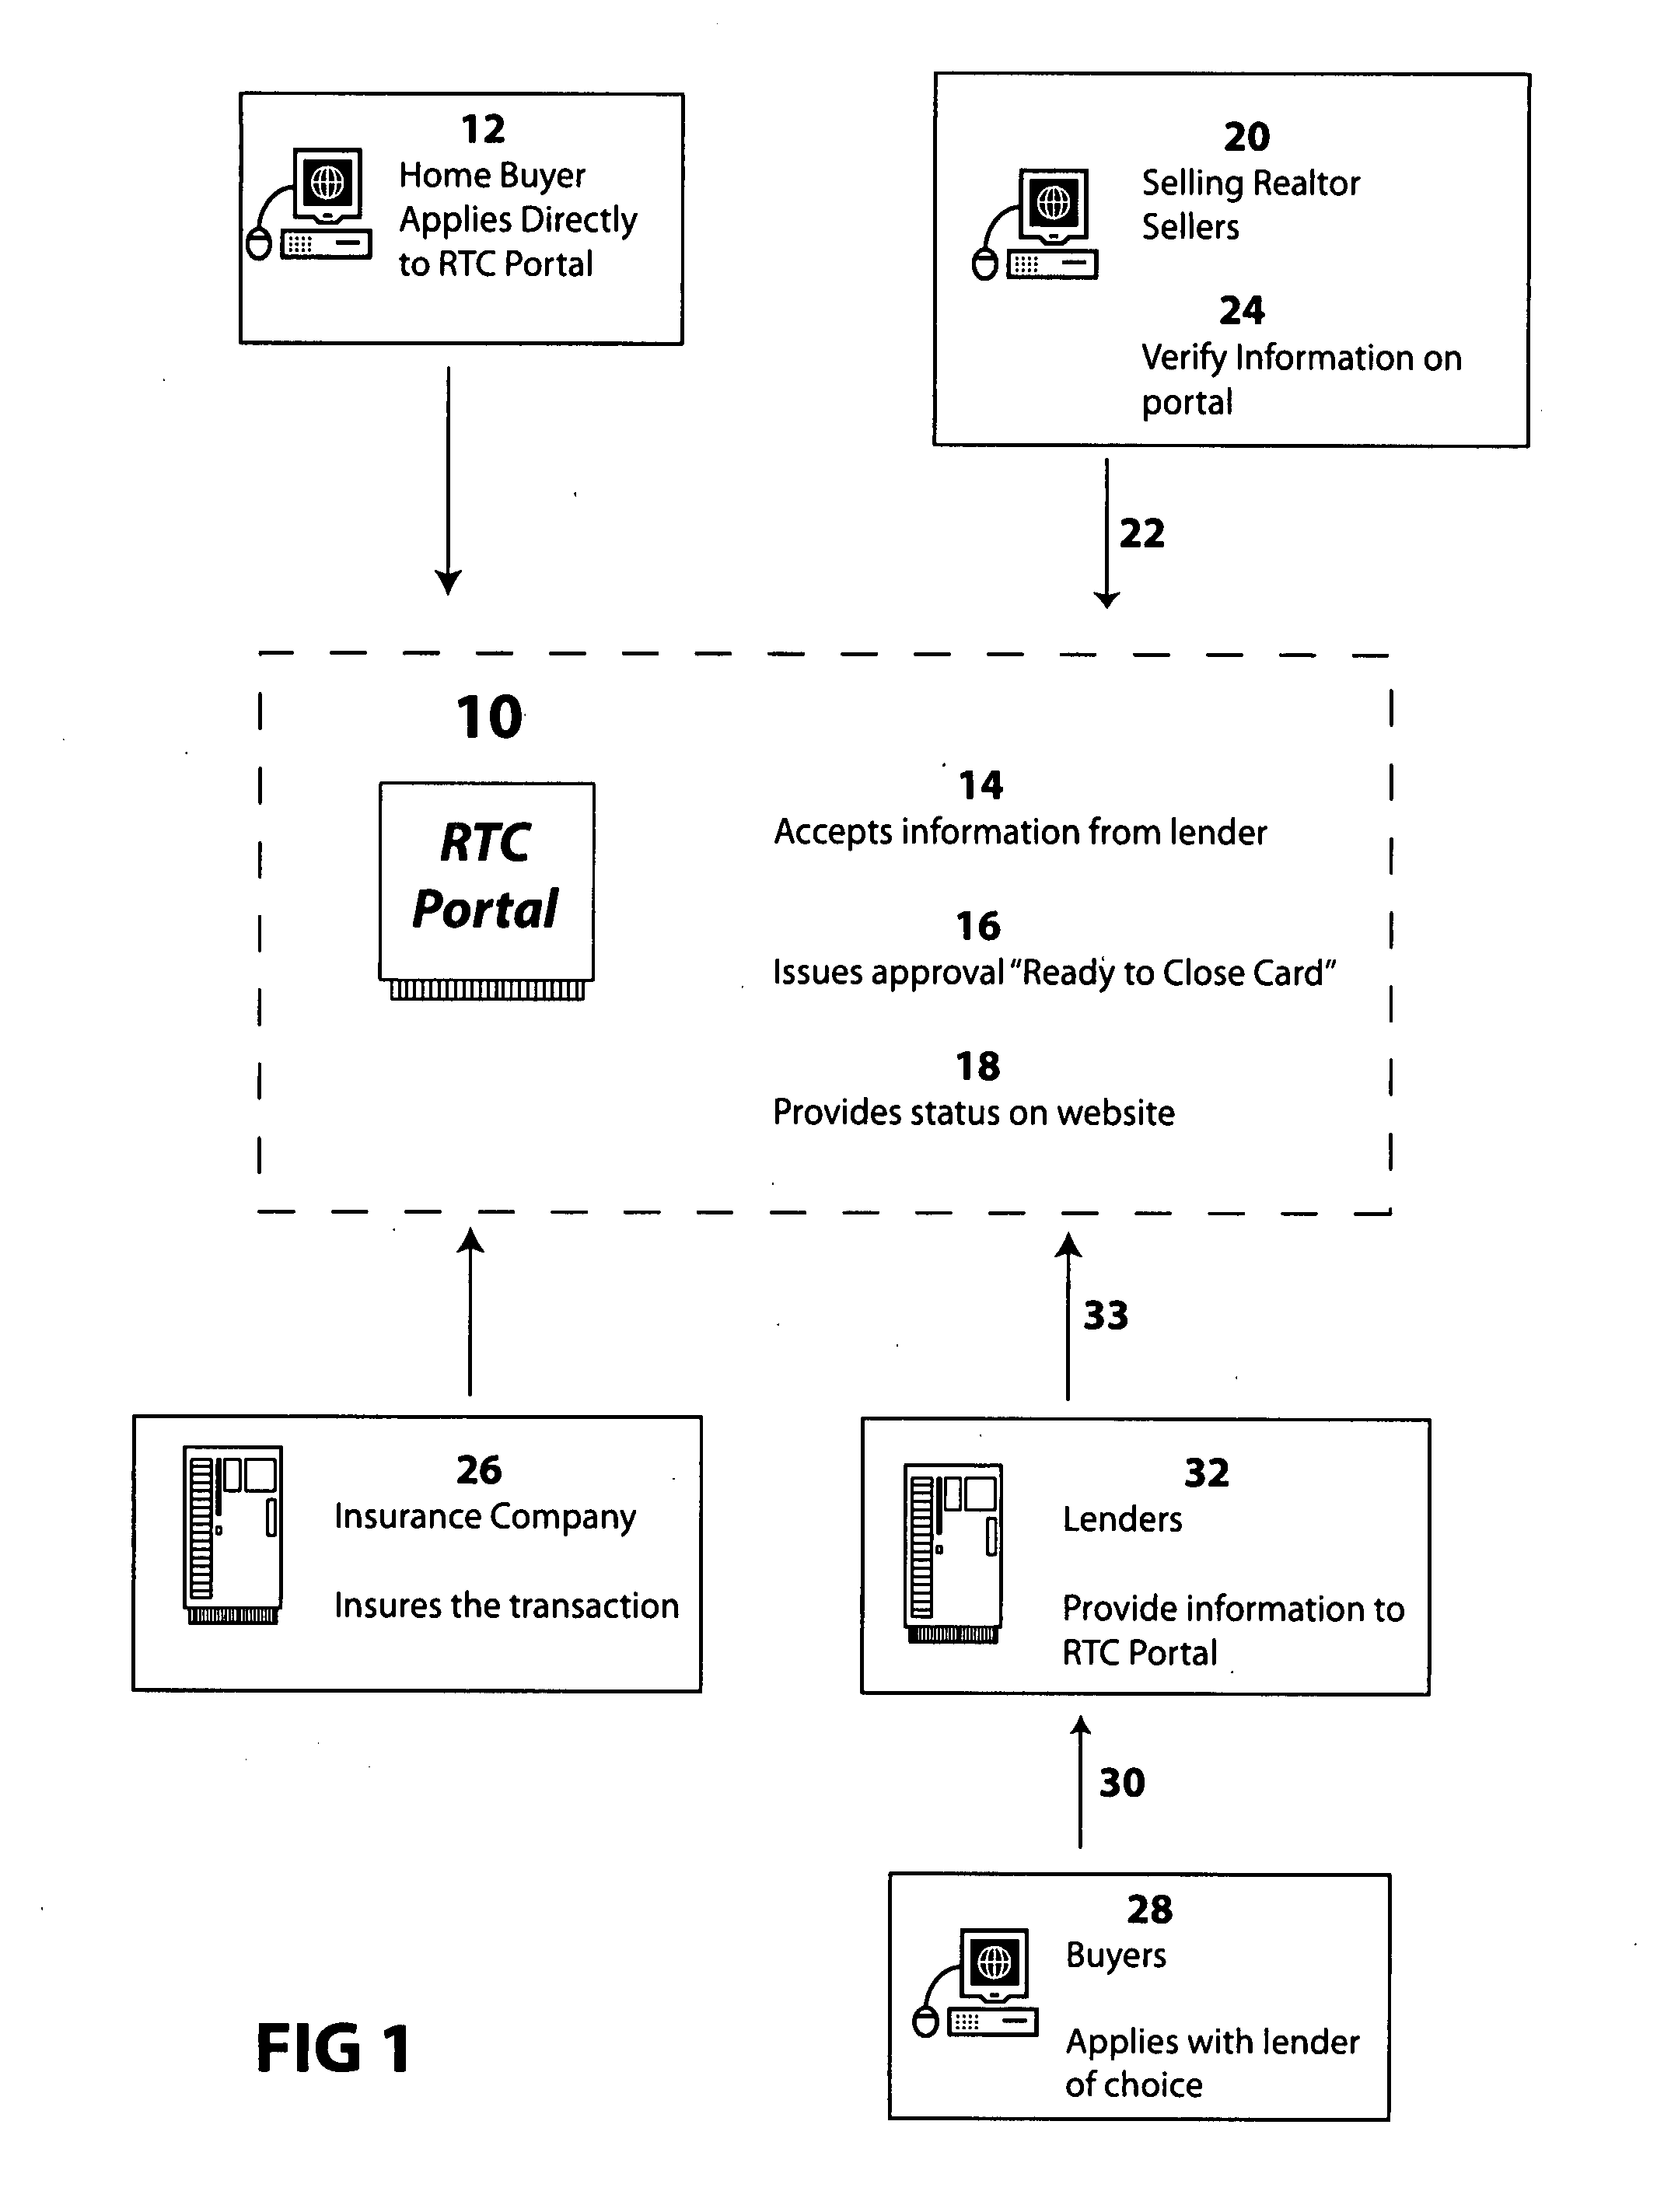 Method for home buyer loan approval process validation